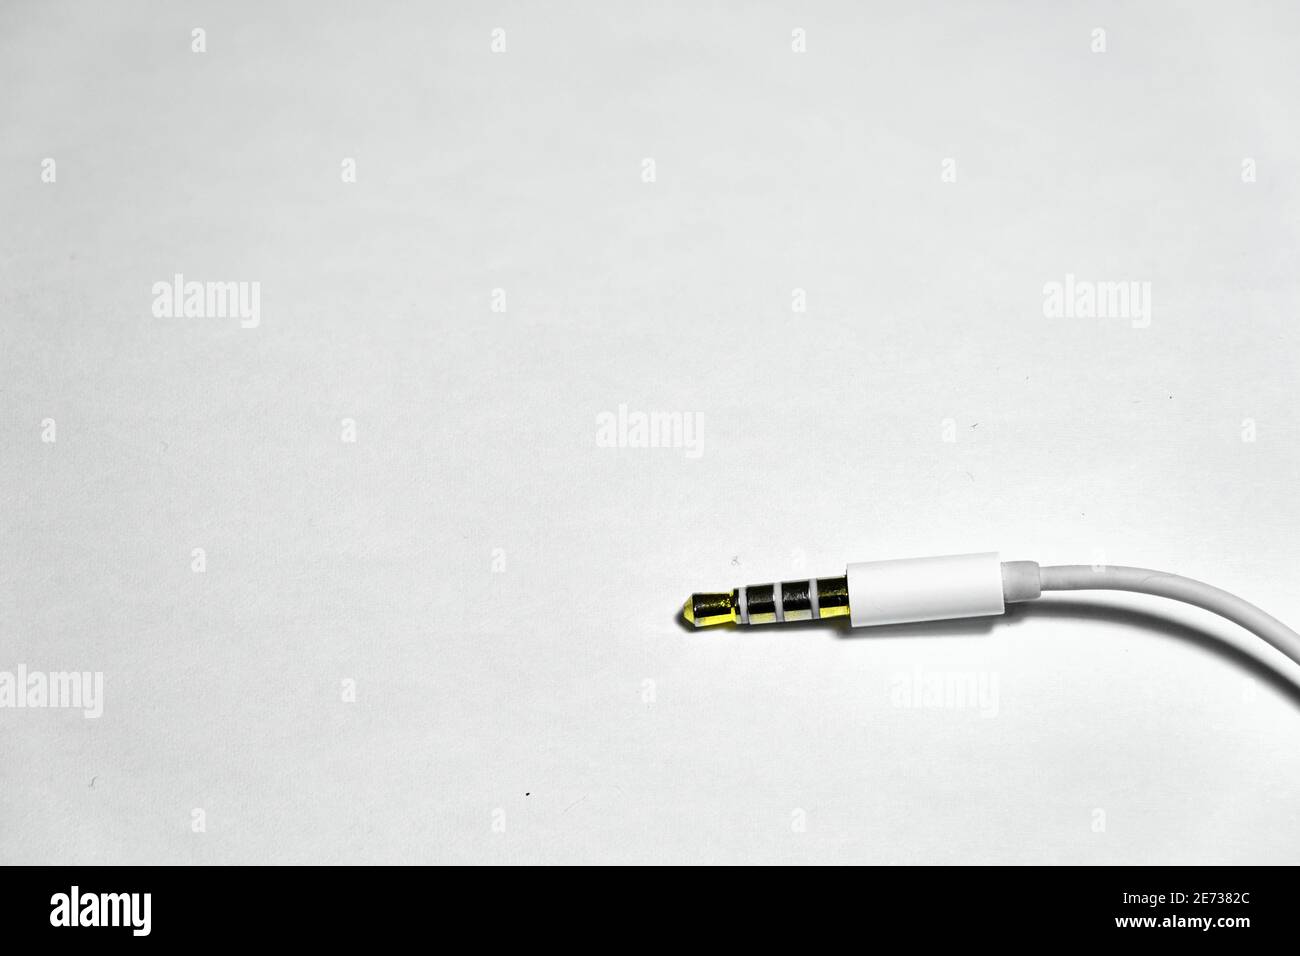 Electronic female socket of earpiece for phone connection with white isolated background and its shiny yellow brass Stock Photo